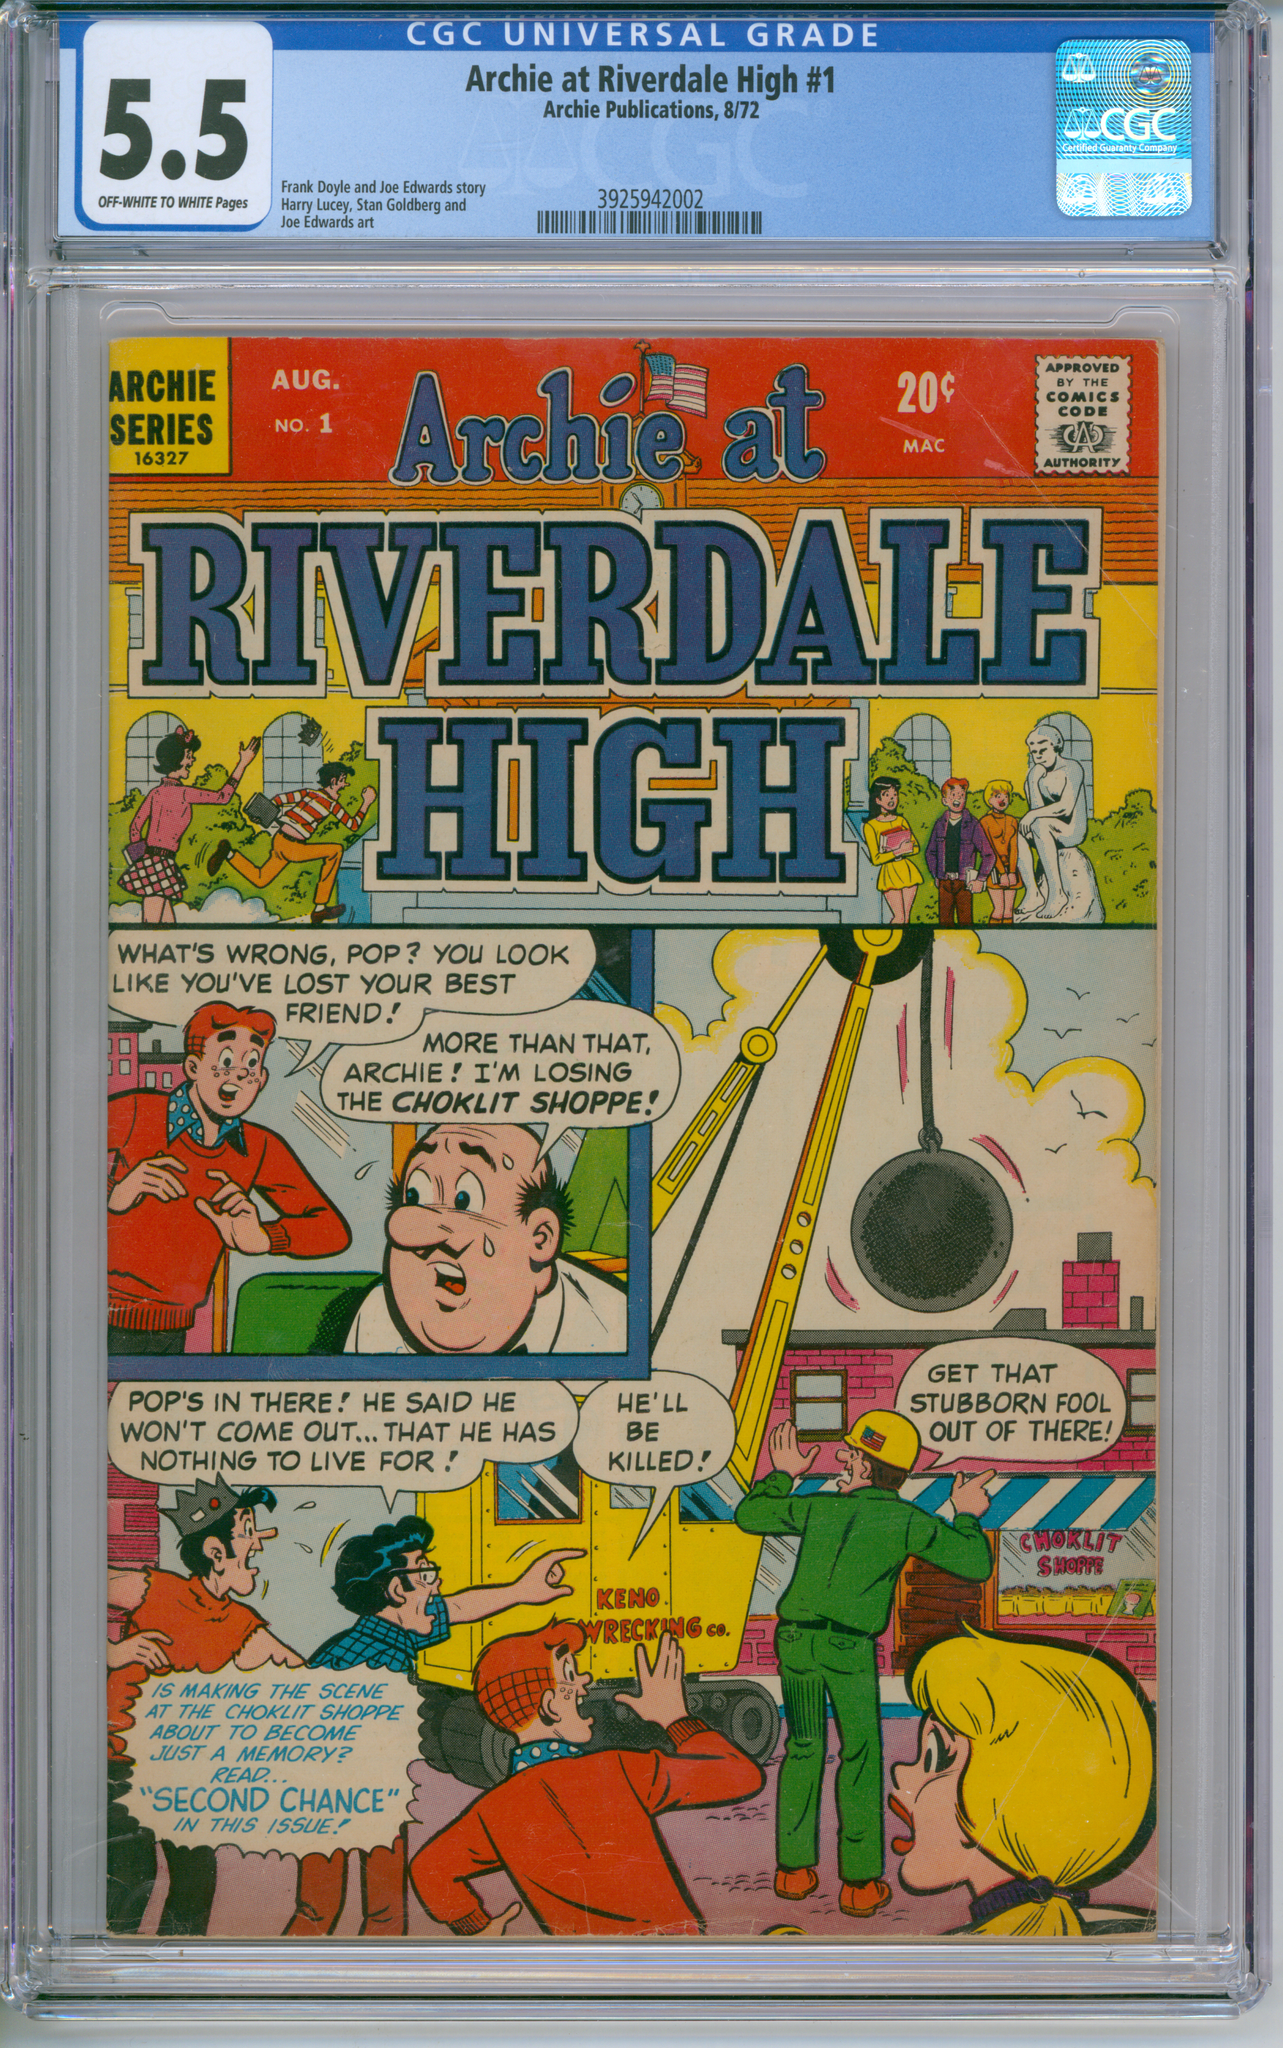 Archie at Riverdale High #1 CGC 5.5